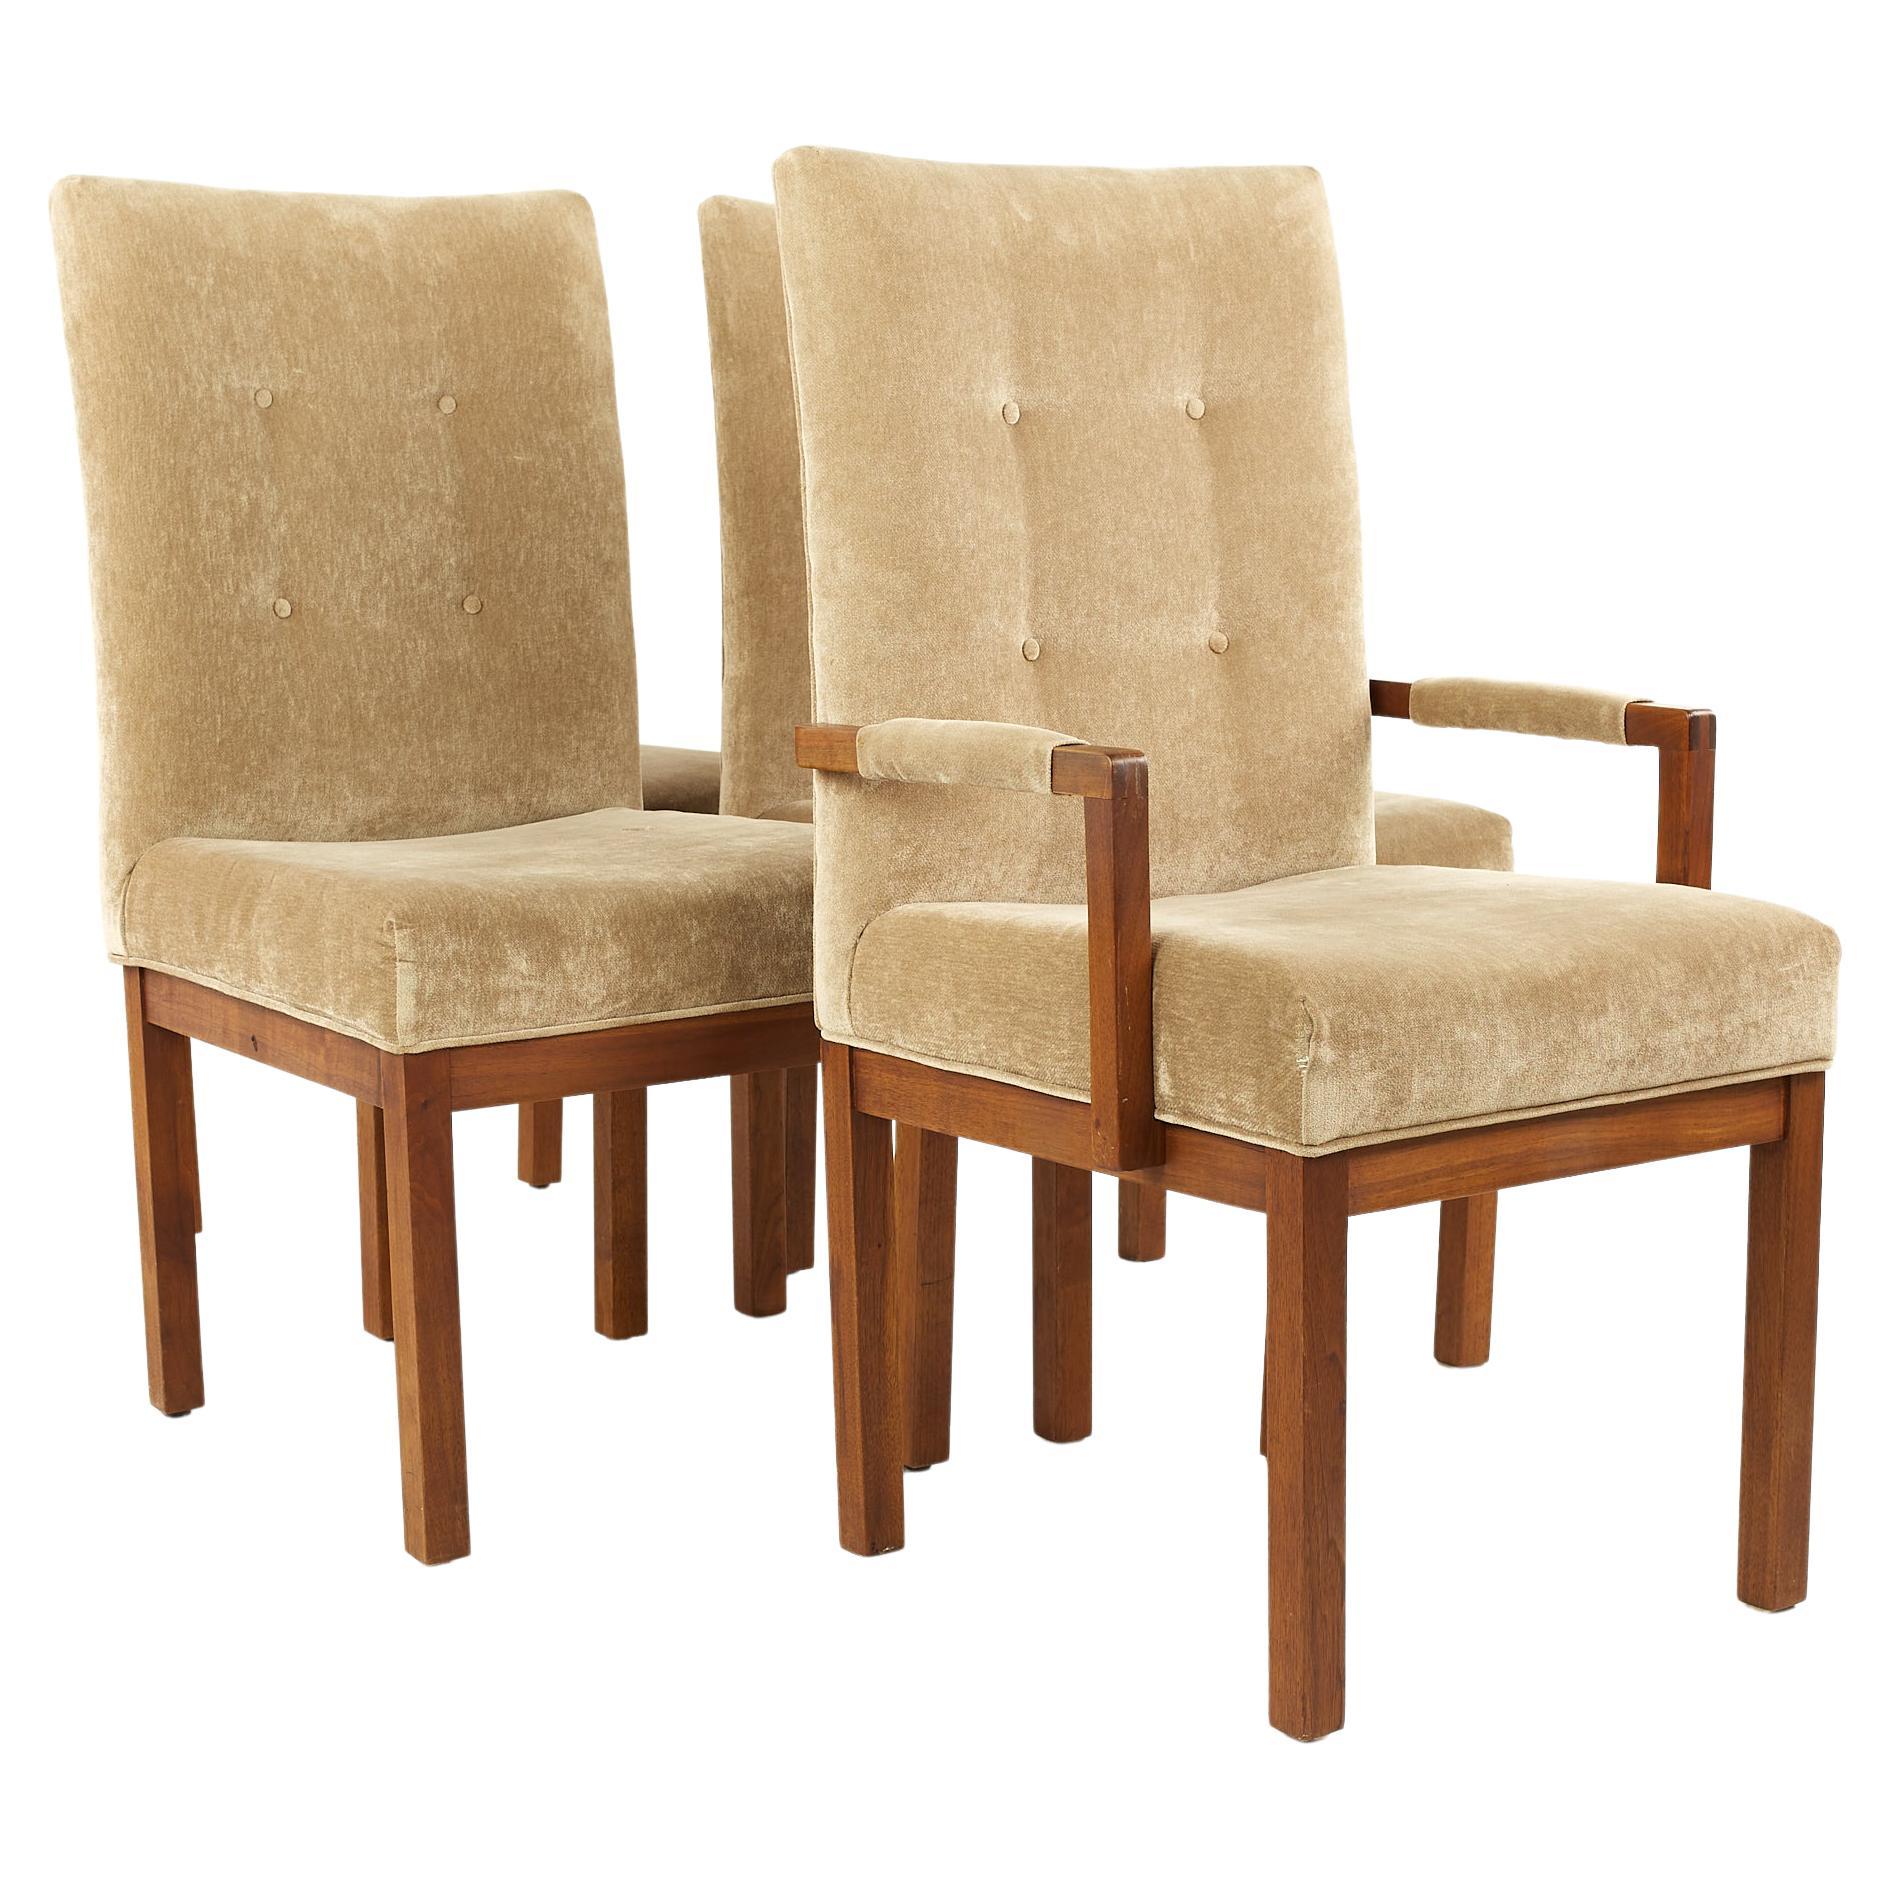 Dillingham Mid Century Walnut Tufted Dining Chairs, Set of 4 For Sale